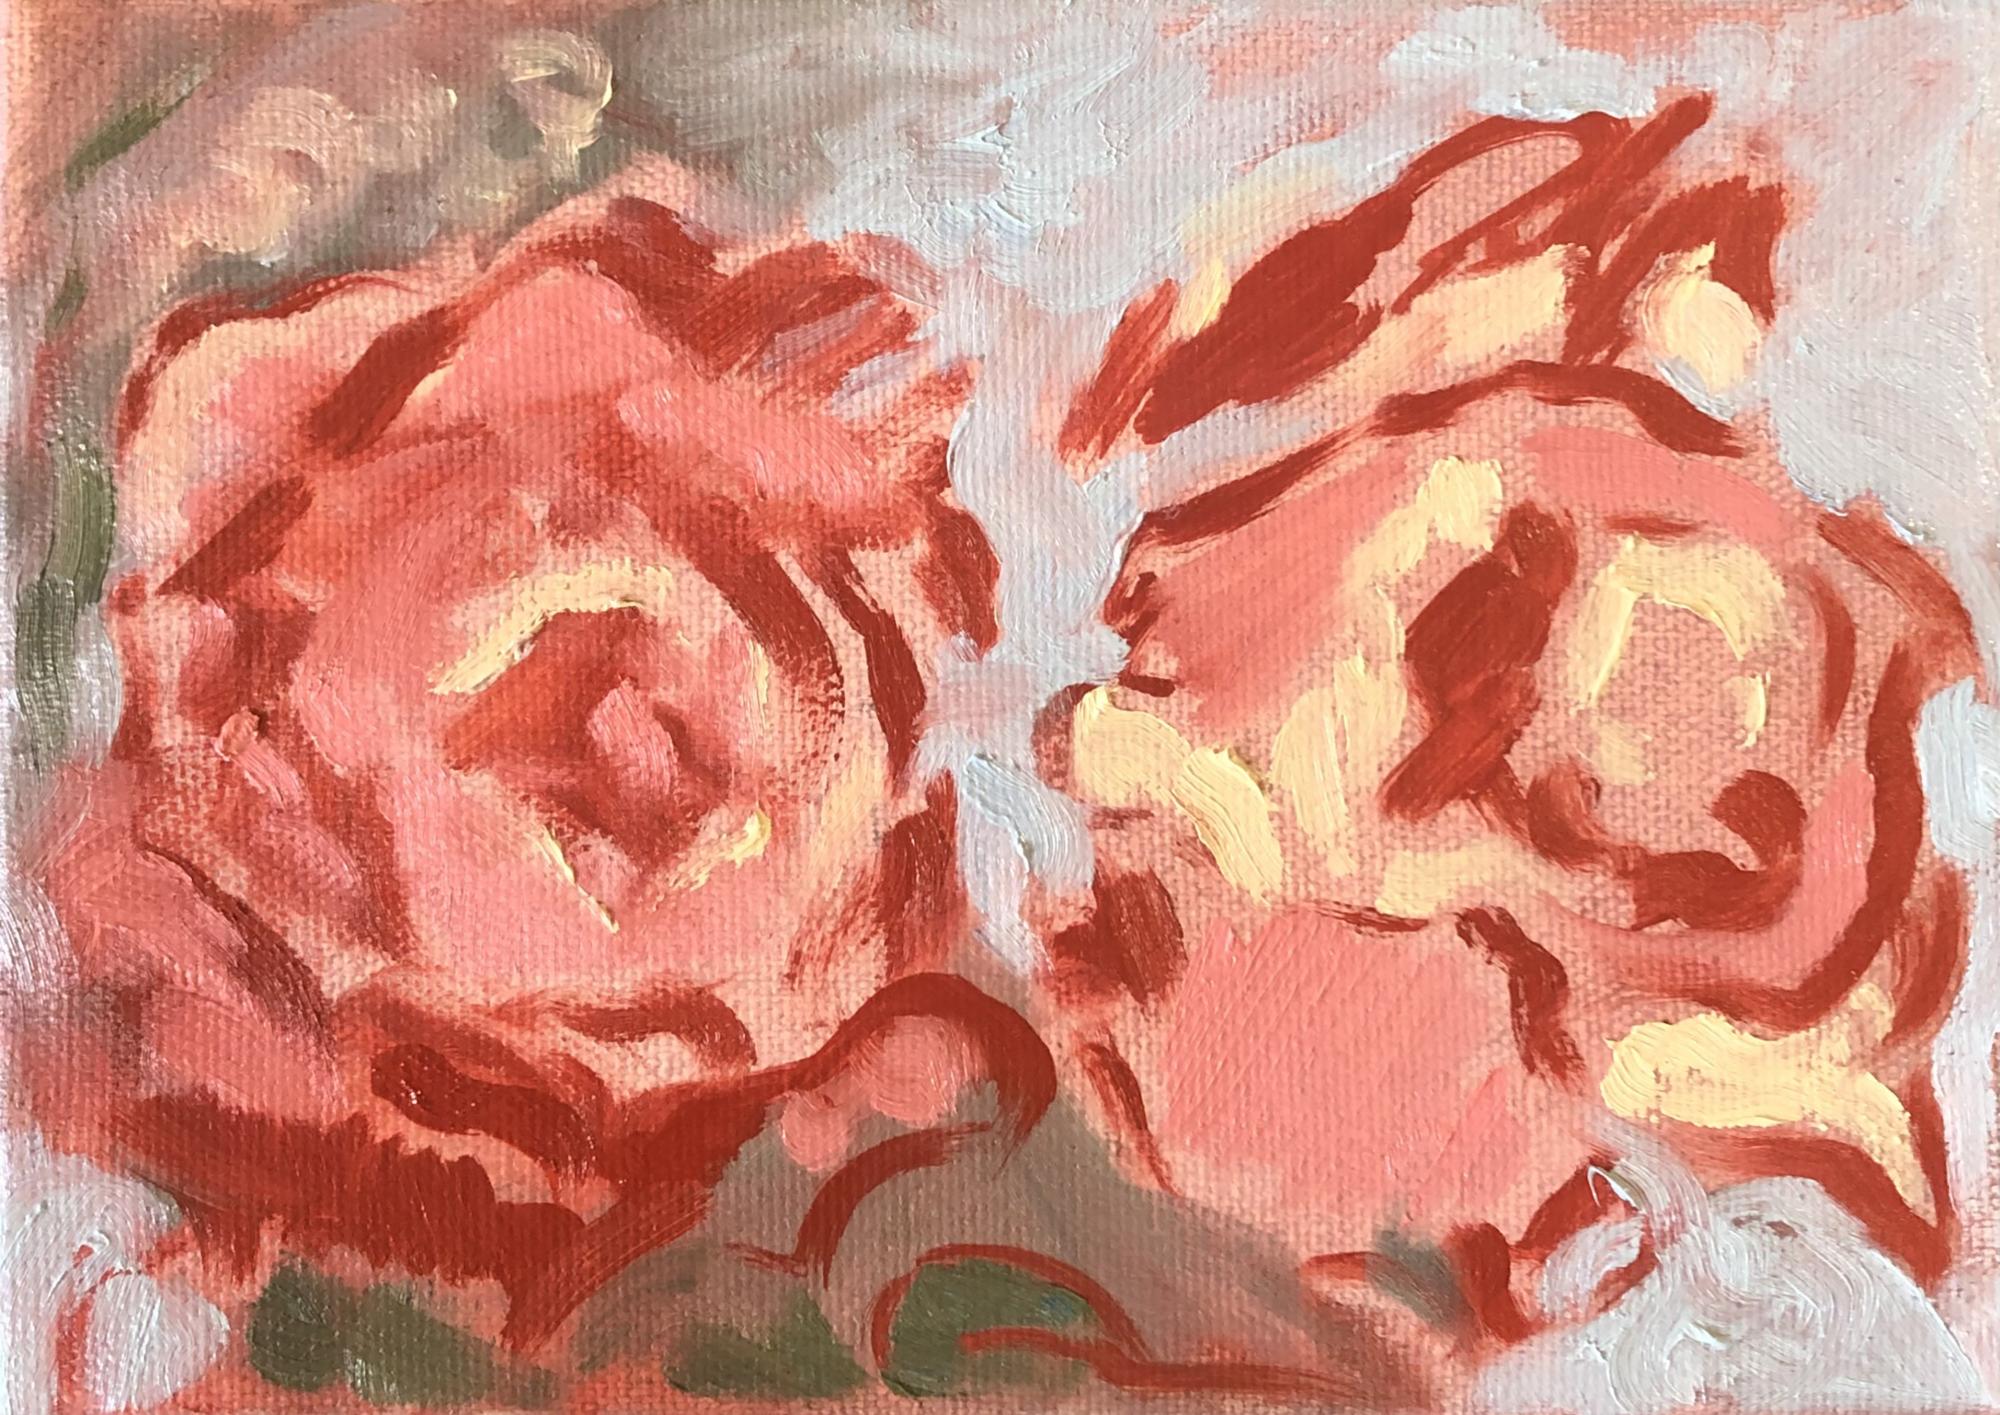 A gestural painting of two roses on a light blue and pink background. Red and pink brush strokes make up the flowers.